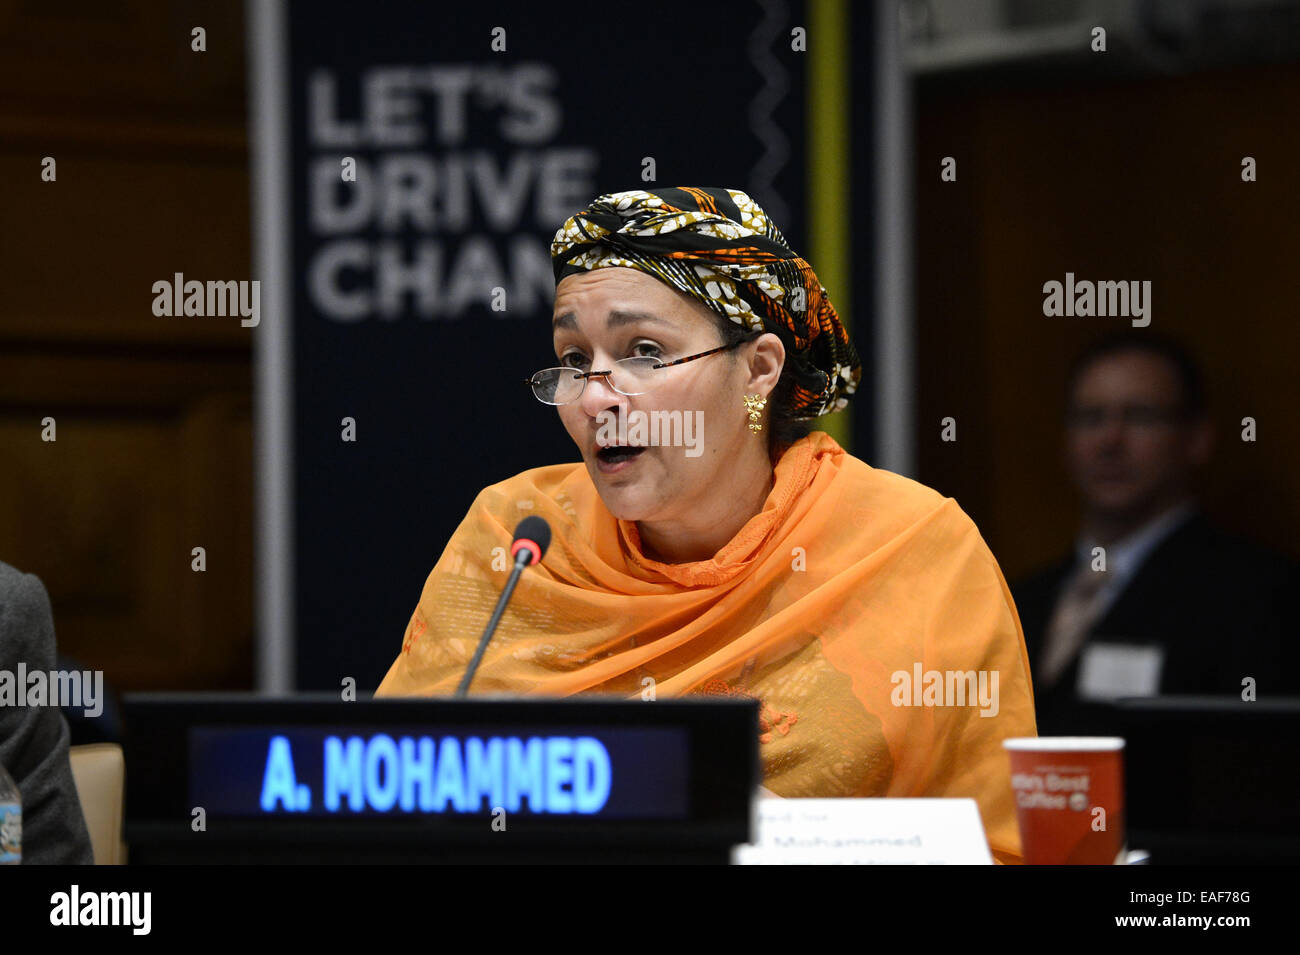 New York, UN headquarters in New York. 13th Nov, 2014. Amina J. Mohammed, UN secretary-general's special advisor on the Post-2015 Development Planning, speaks during a panel discussion marking the launch of Together for Safer Roads, a private sector initiative aimed at reducing road traffic collisions, at the UN headquarters in New York, on Nov. 13, 2014. A UN official on Thursday called for global partnerships between all sectors of enterprise to tackle deaths and injuries by traffic accidents. Credit:  Niu Xiaolei/Xinhua/Alamy Live News Stock Photo